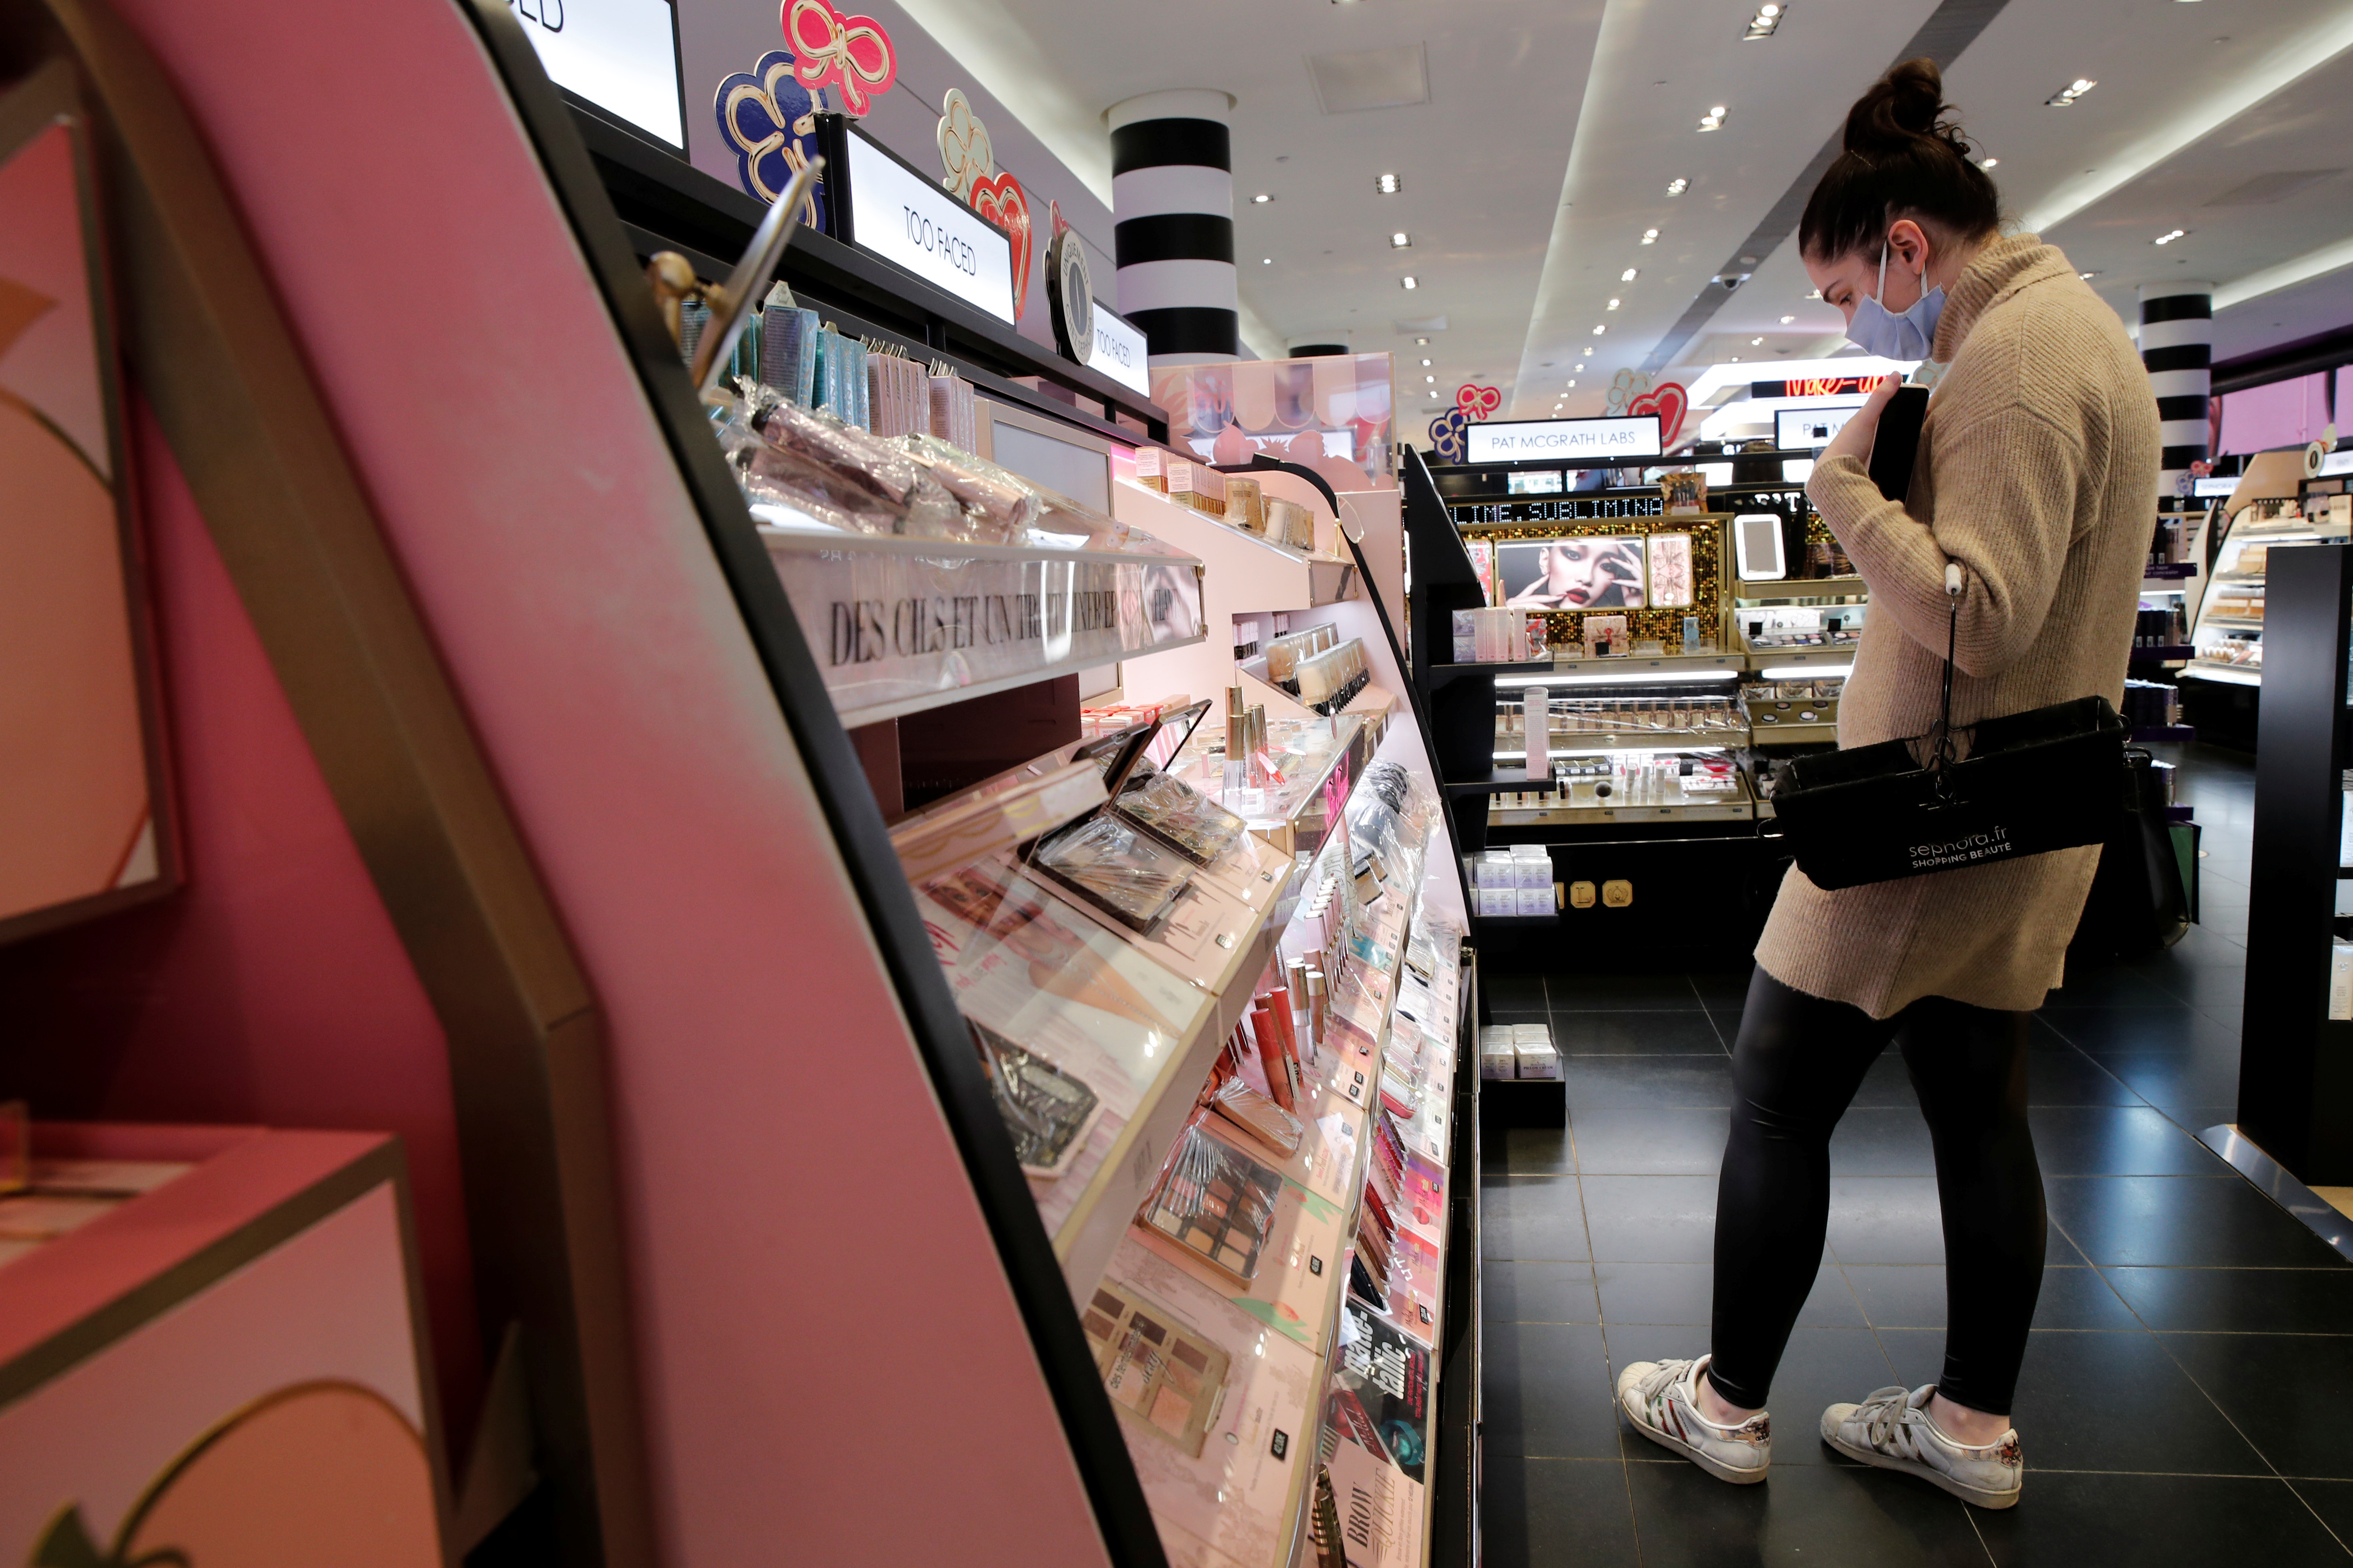 LVMH-owned Sephora sues local firm for trademark infringement, ET Retail